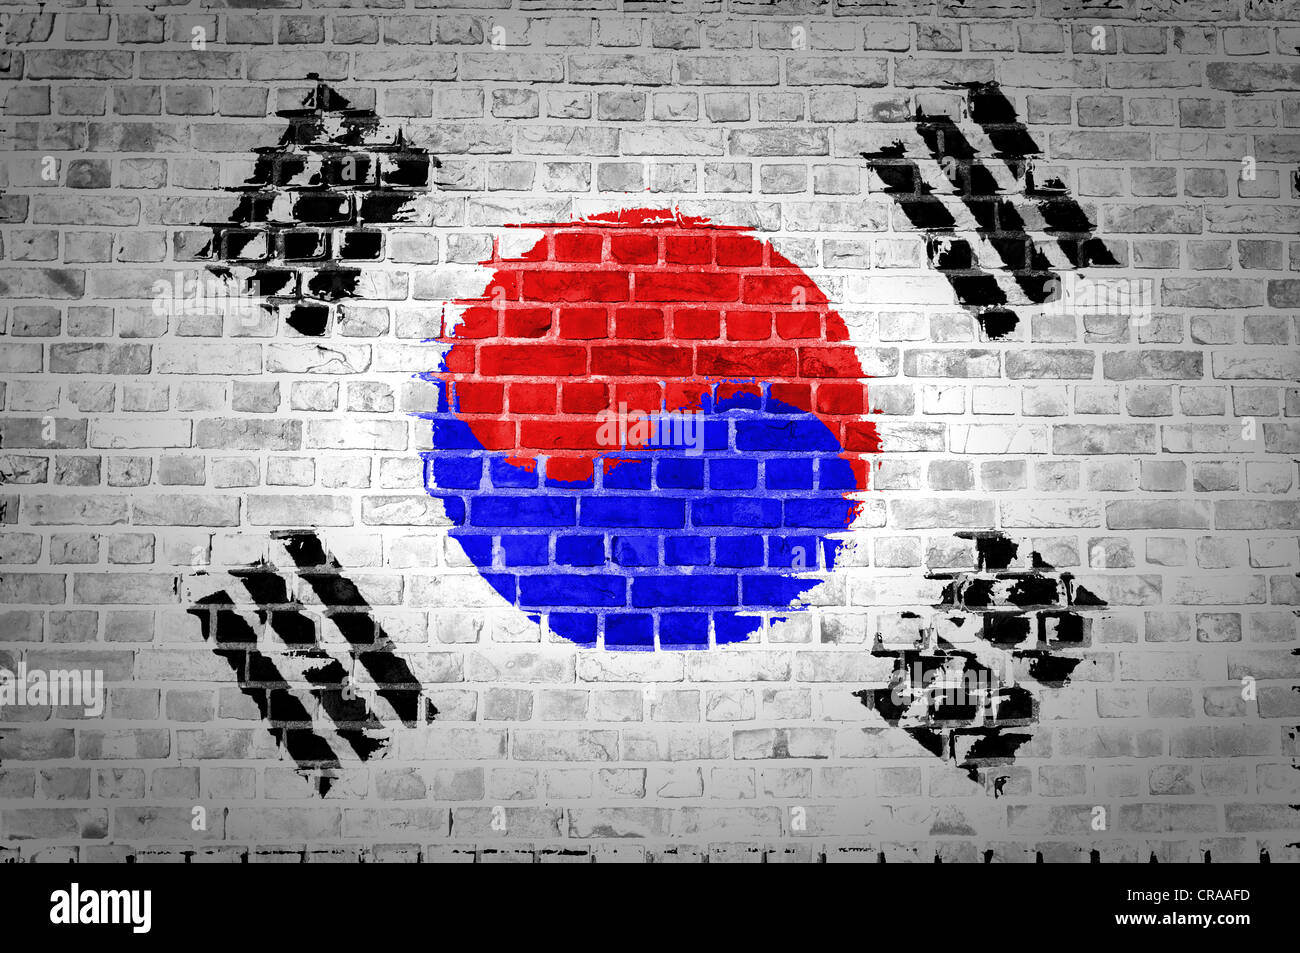 An image of the South Korea flag painted on a brick wall in an urban location Stock Photo